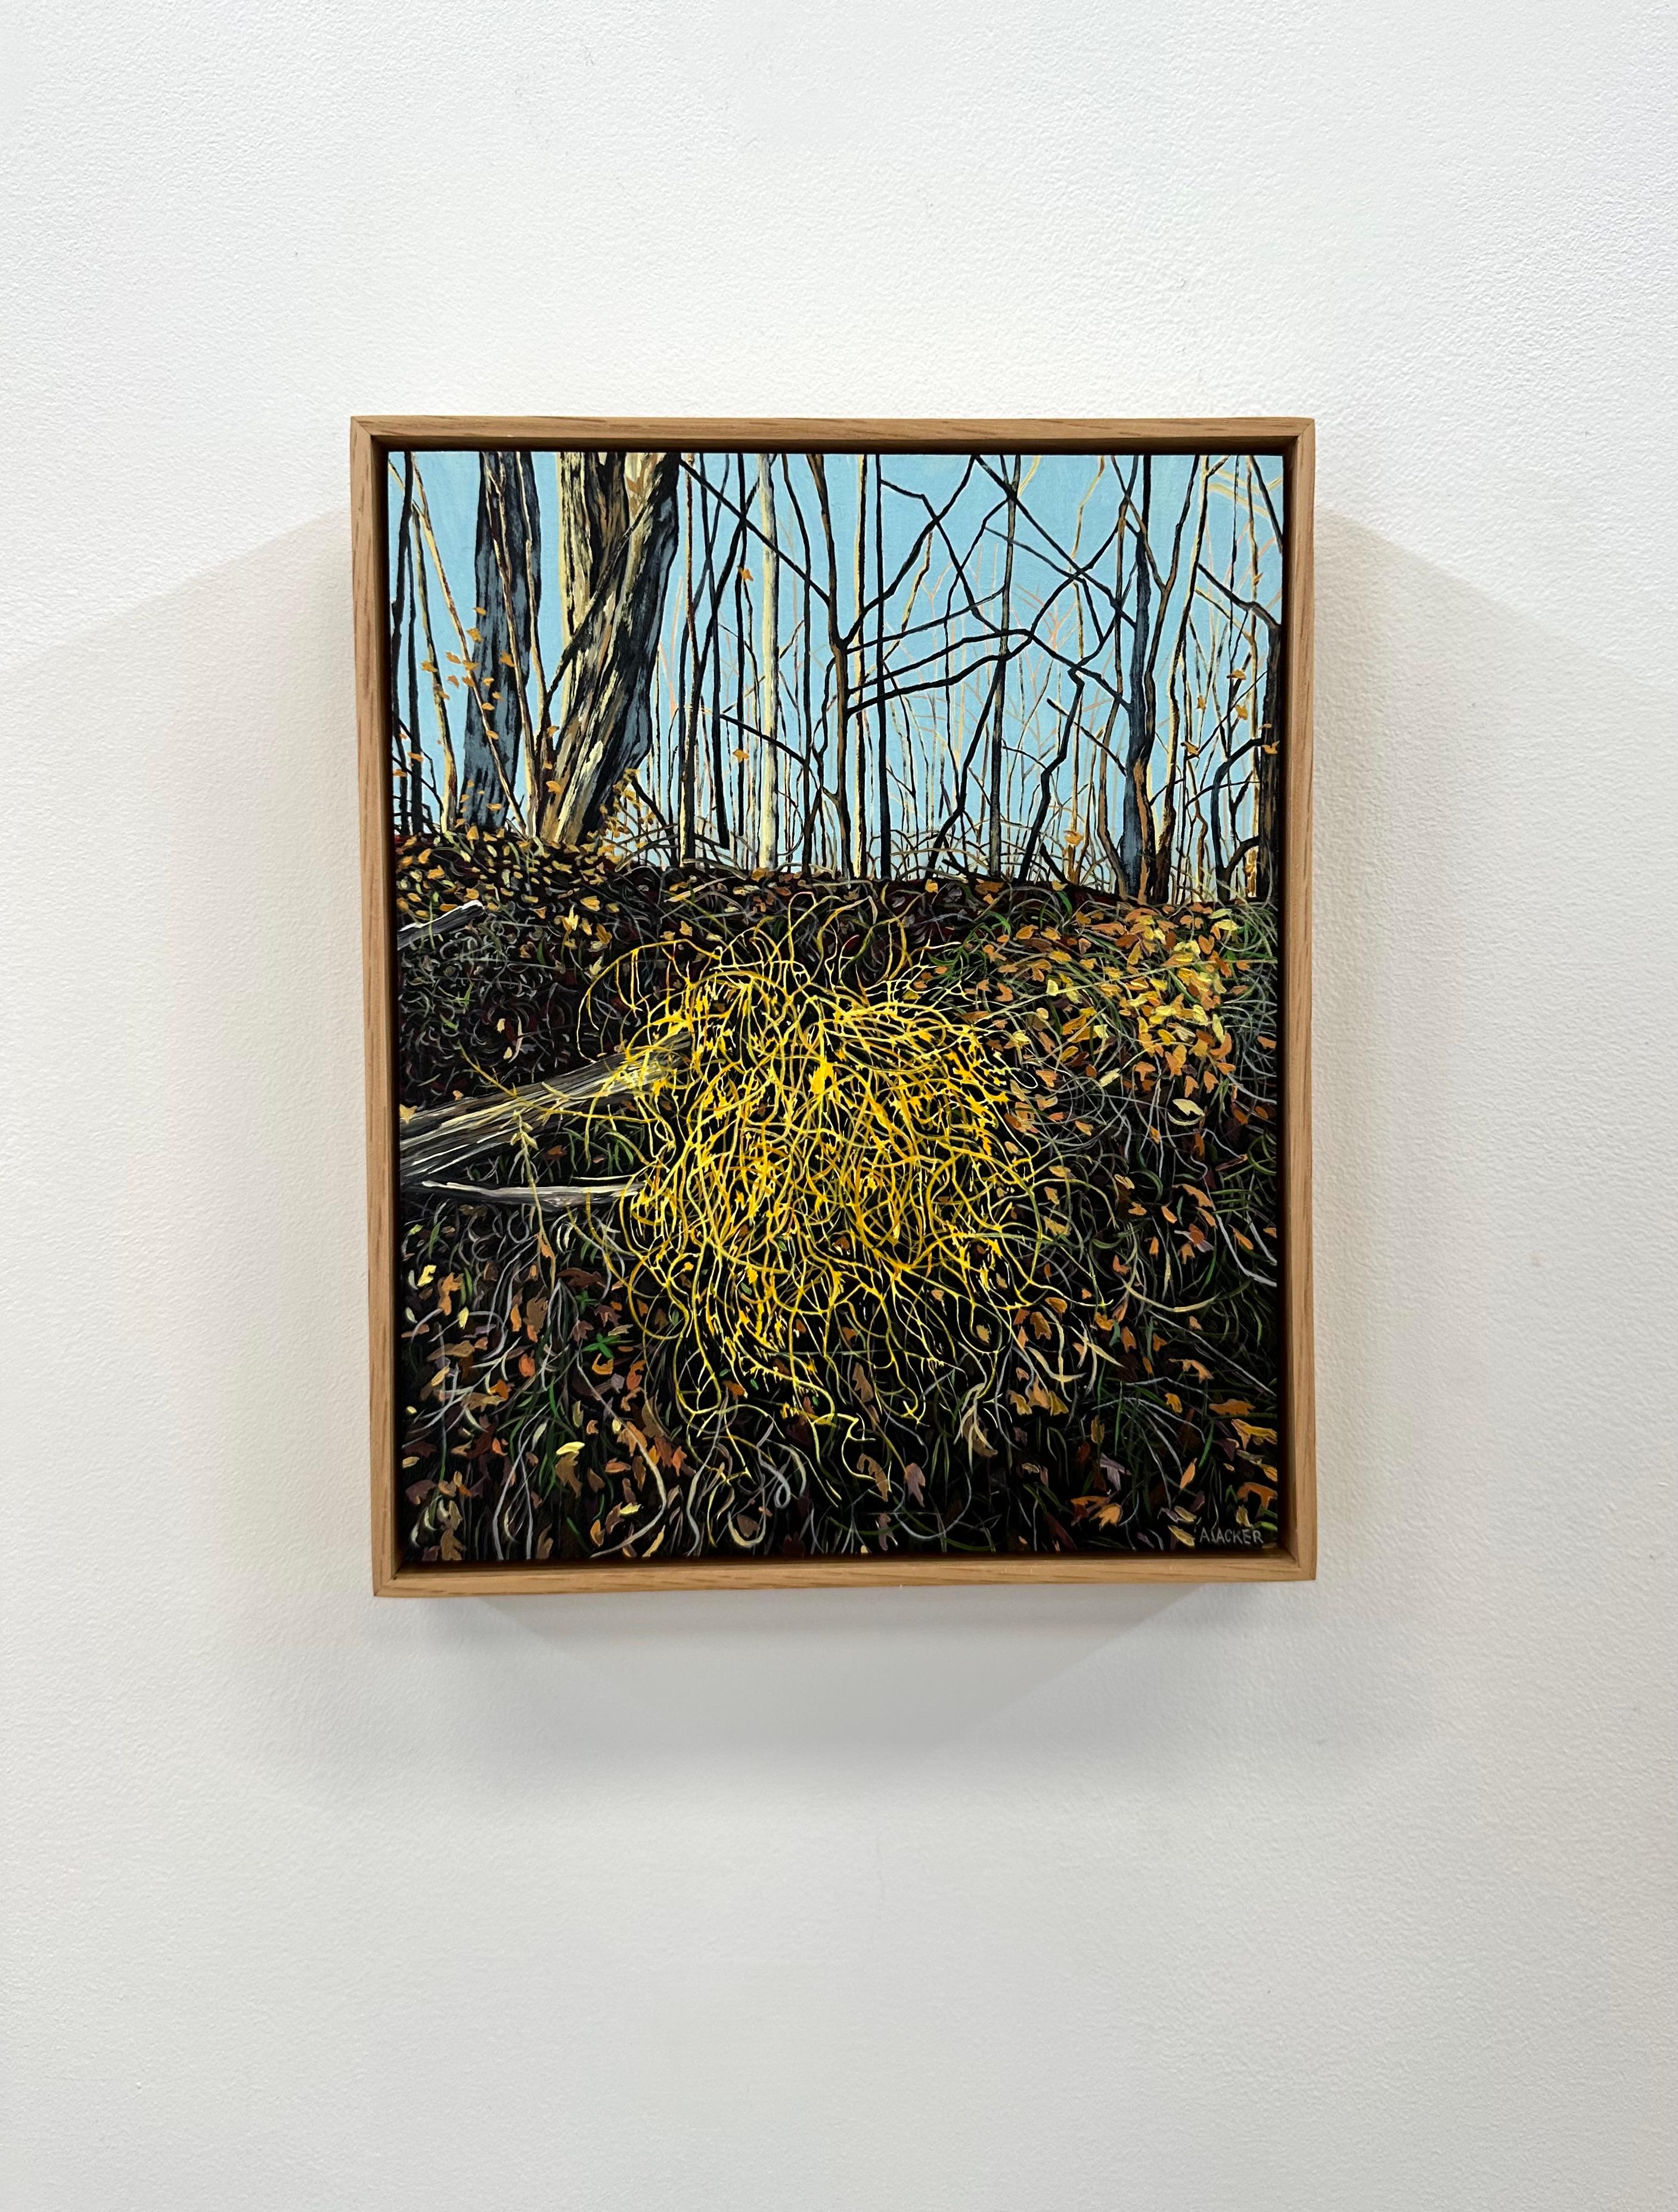 Wild Asparagus, Yellow Bush in Forest, Trees, Blue Sky, Leaves on Ground - Painting by Amanda Acker